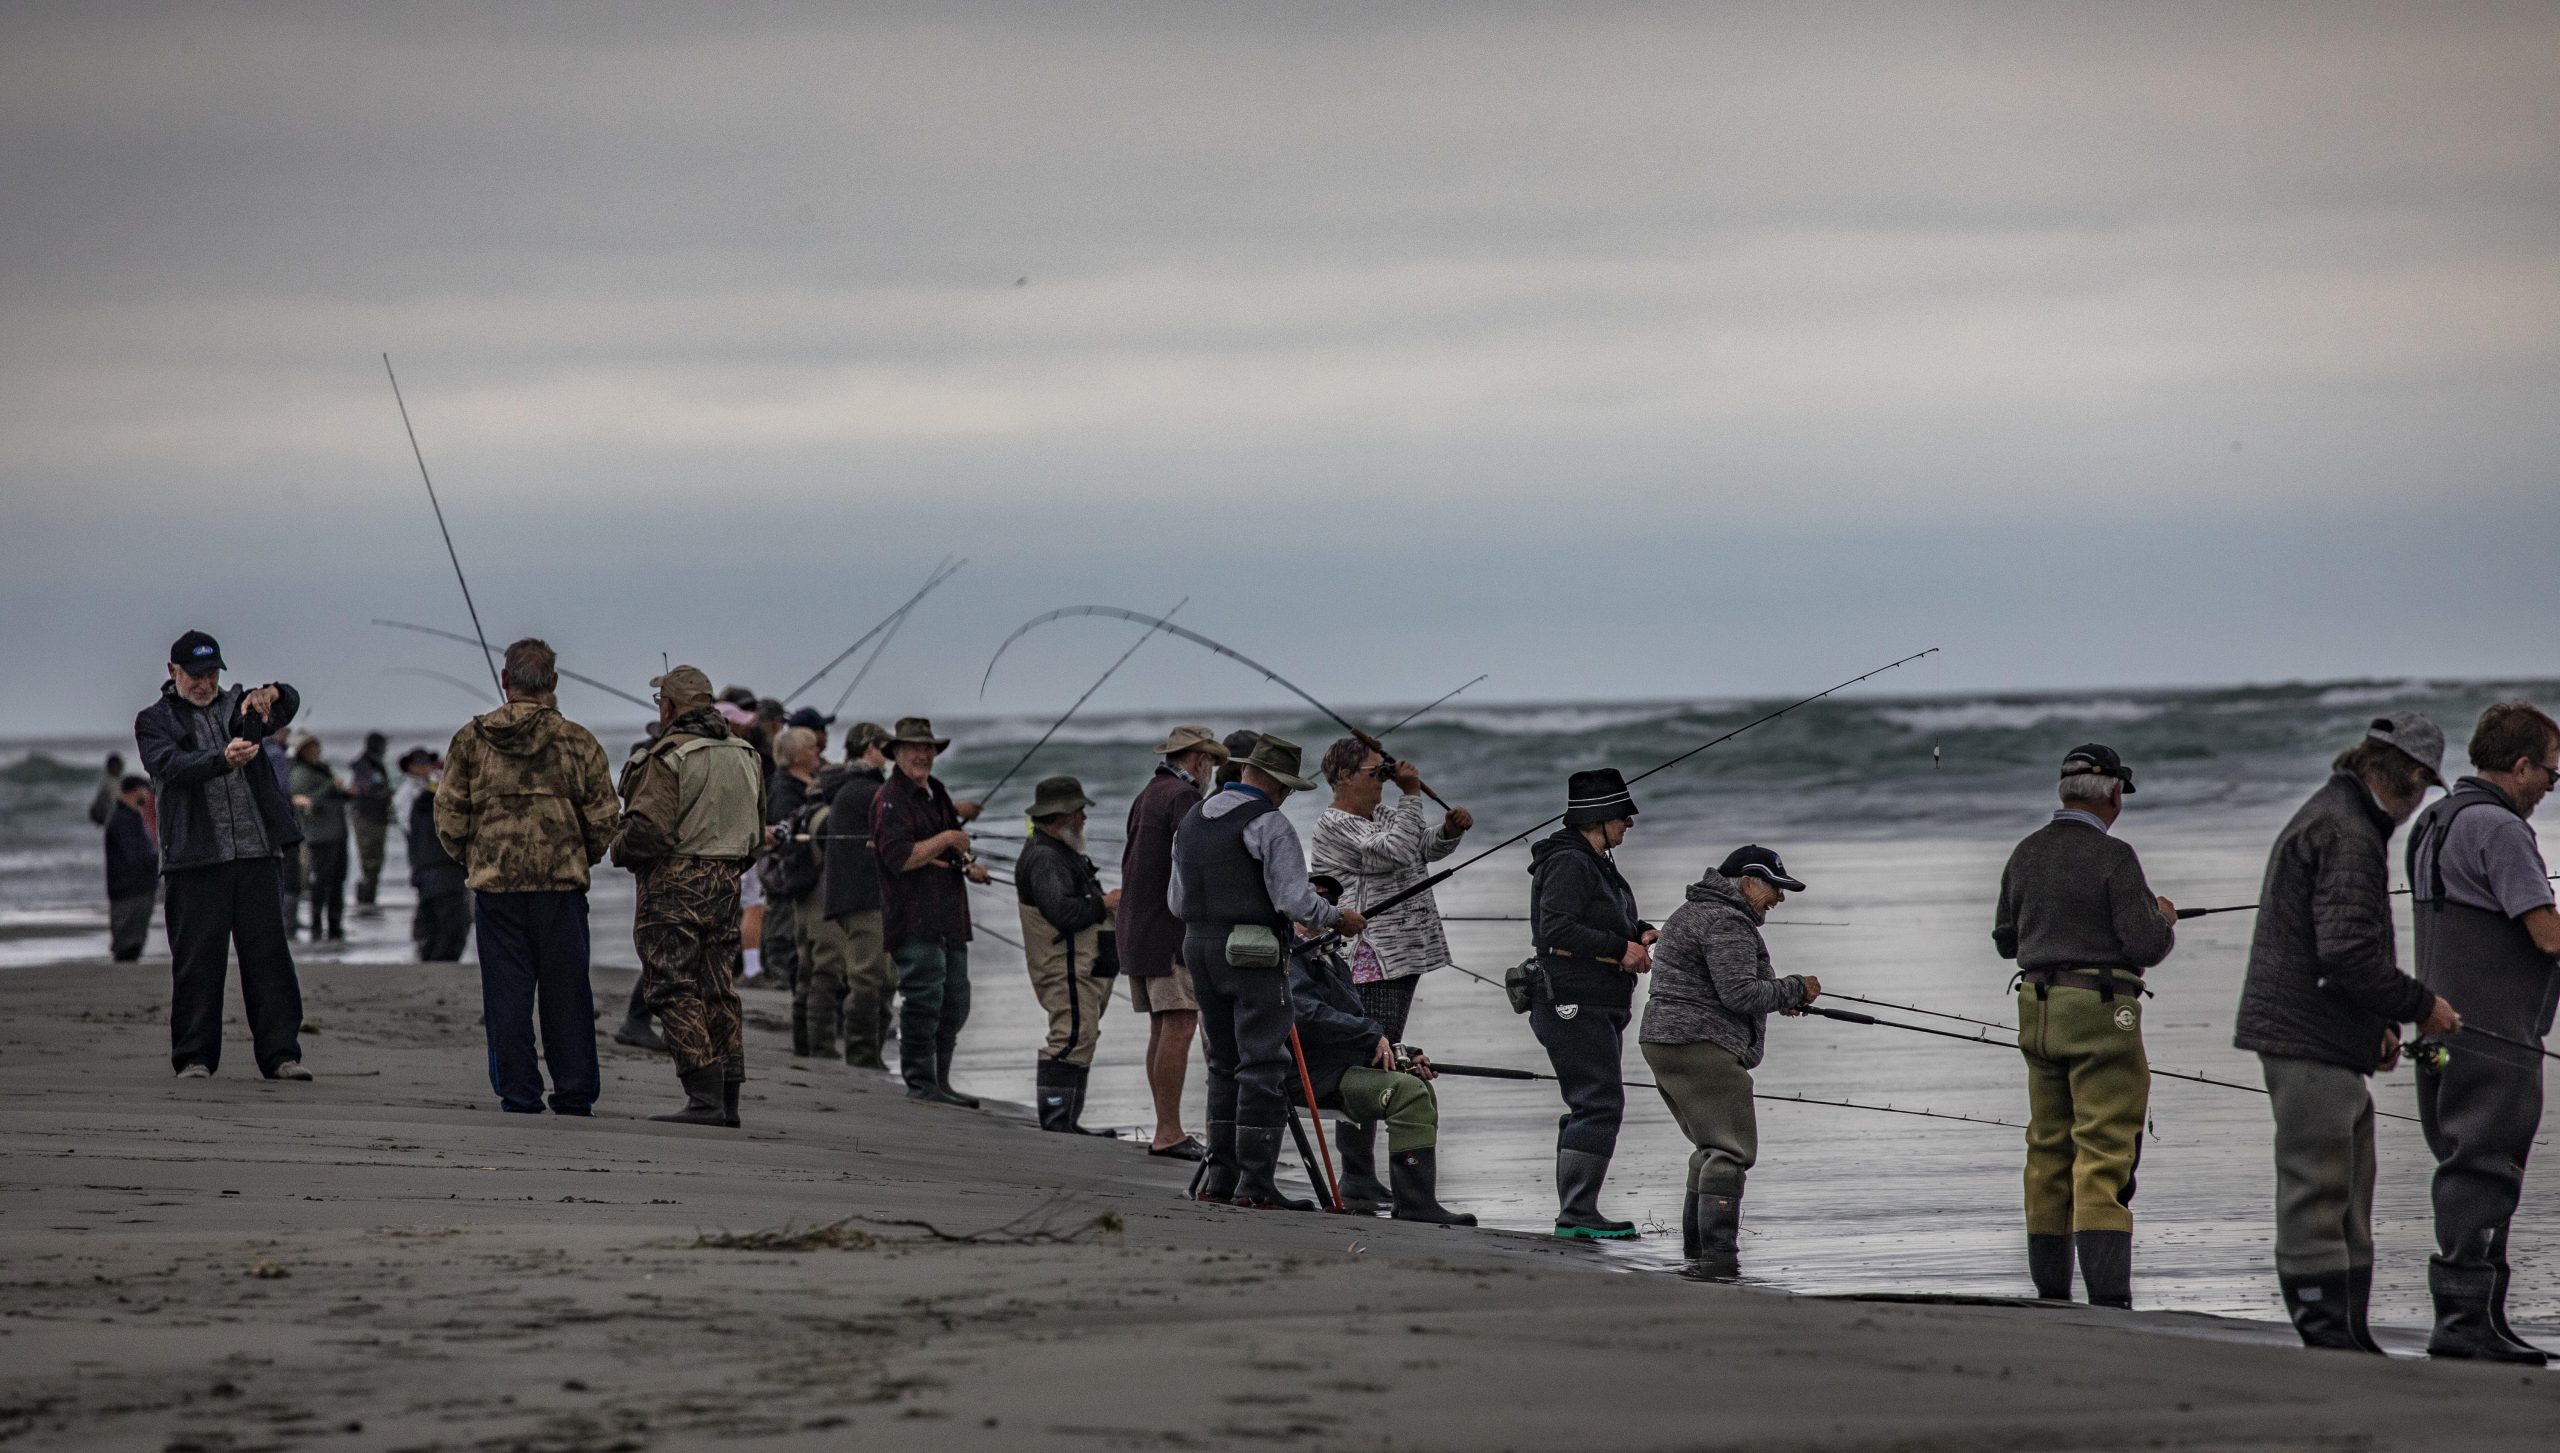 Salmon fishing contest a social get-together